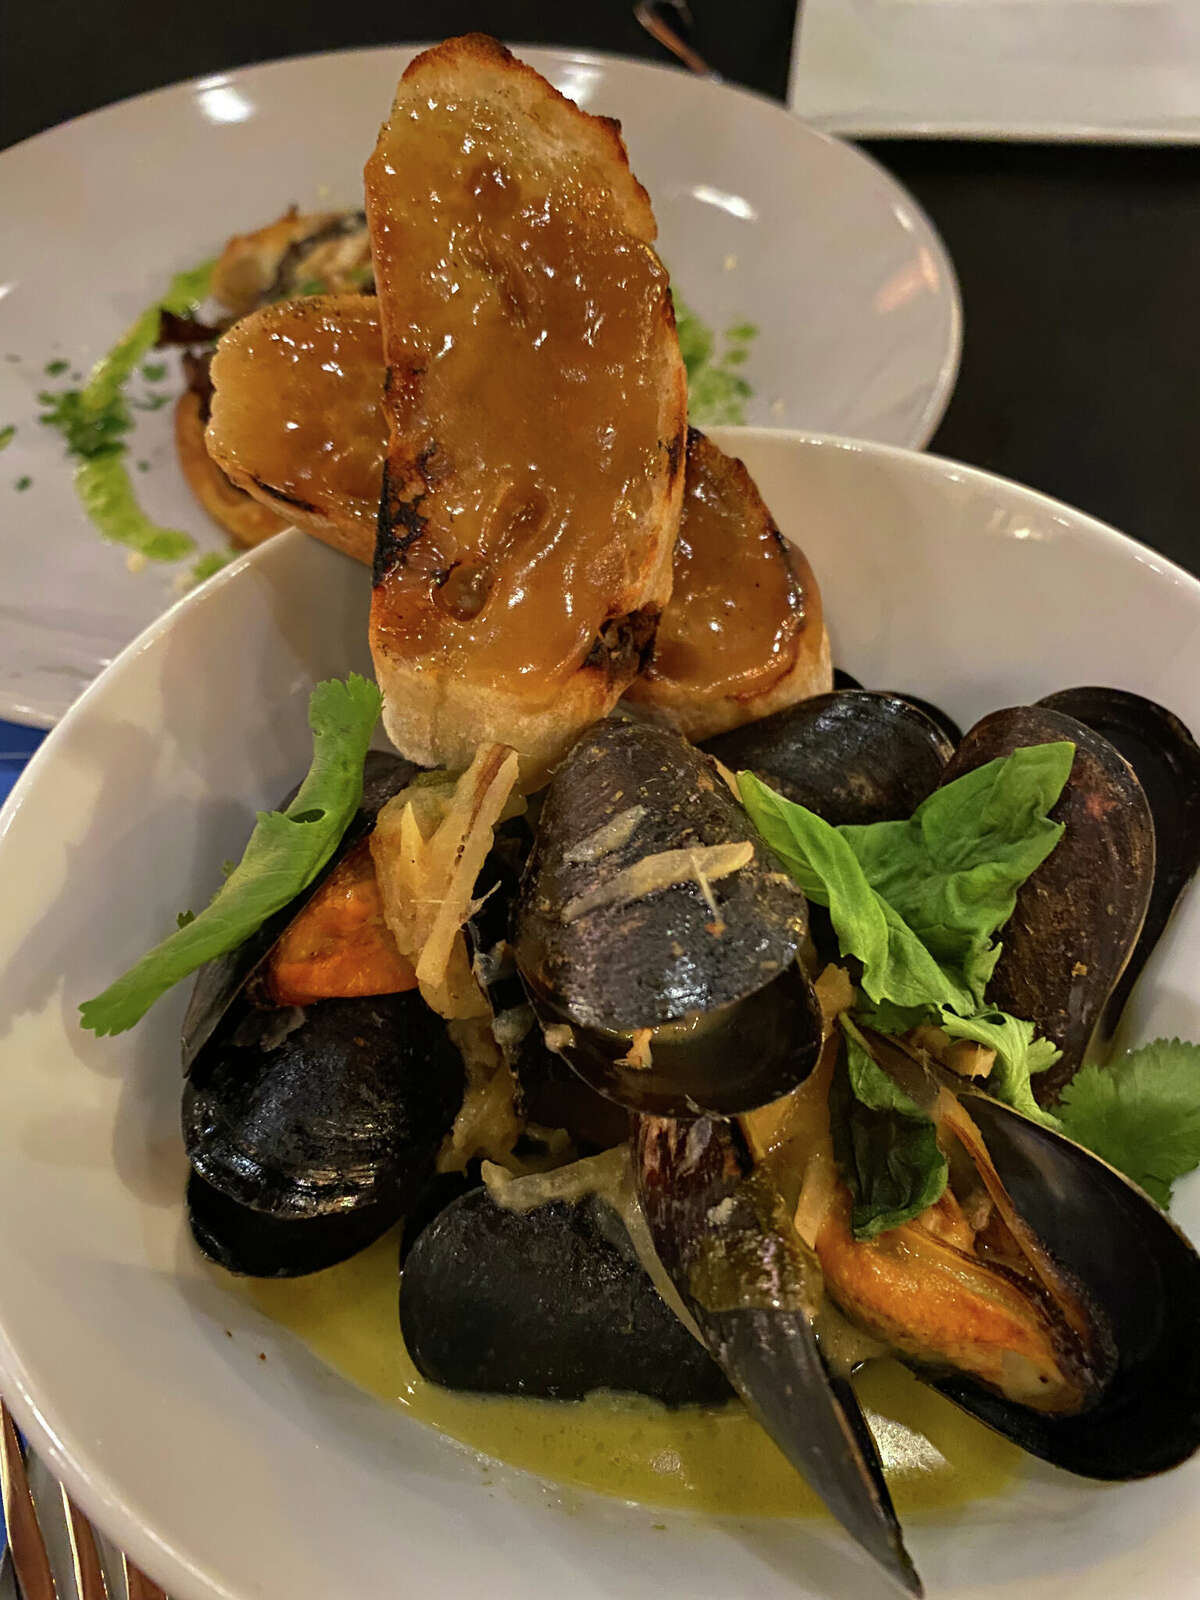 At Flight Wine Bar & Market in Glens Falls, Thai mussels are served with toast topped by coconut jam.